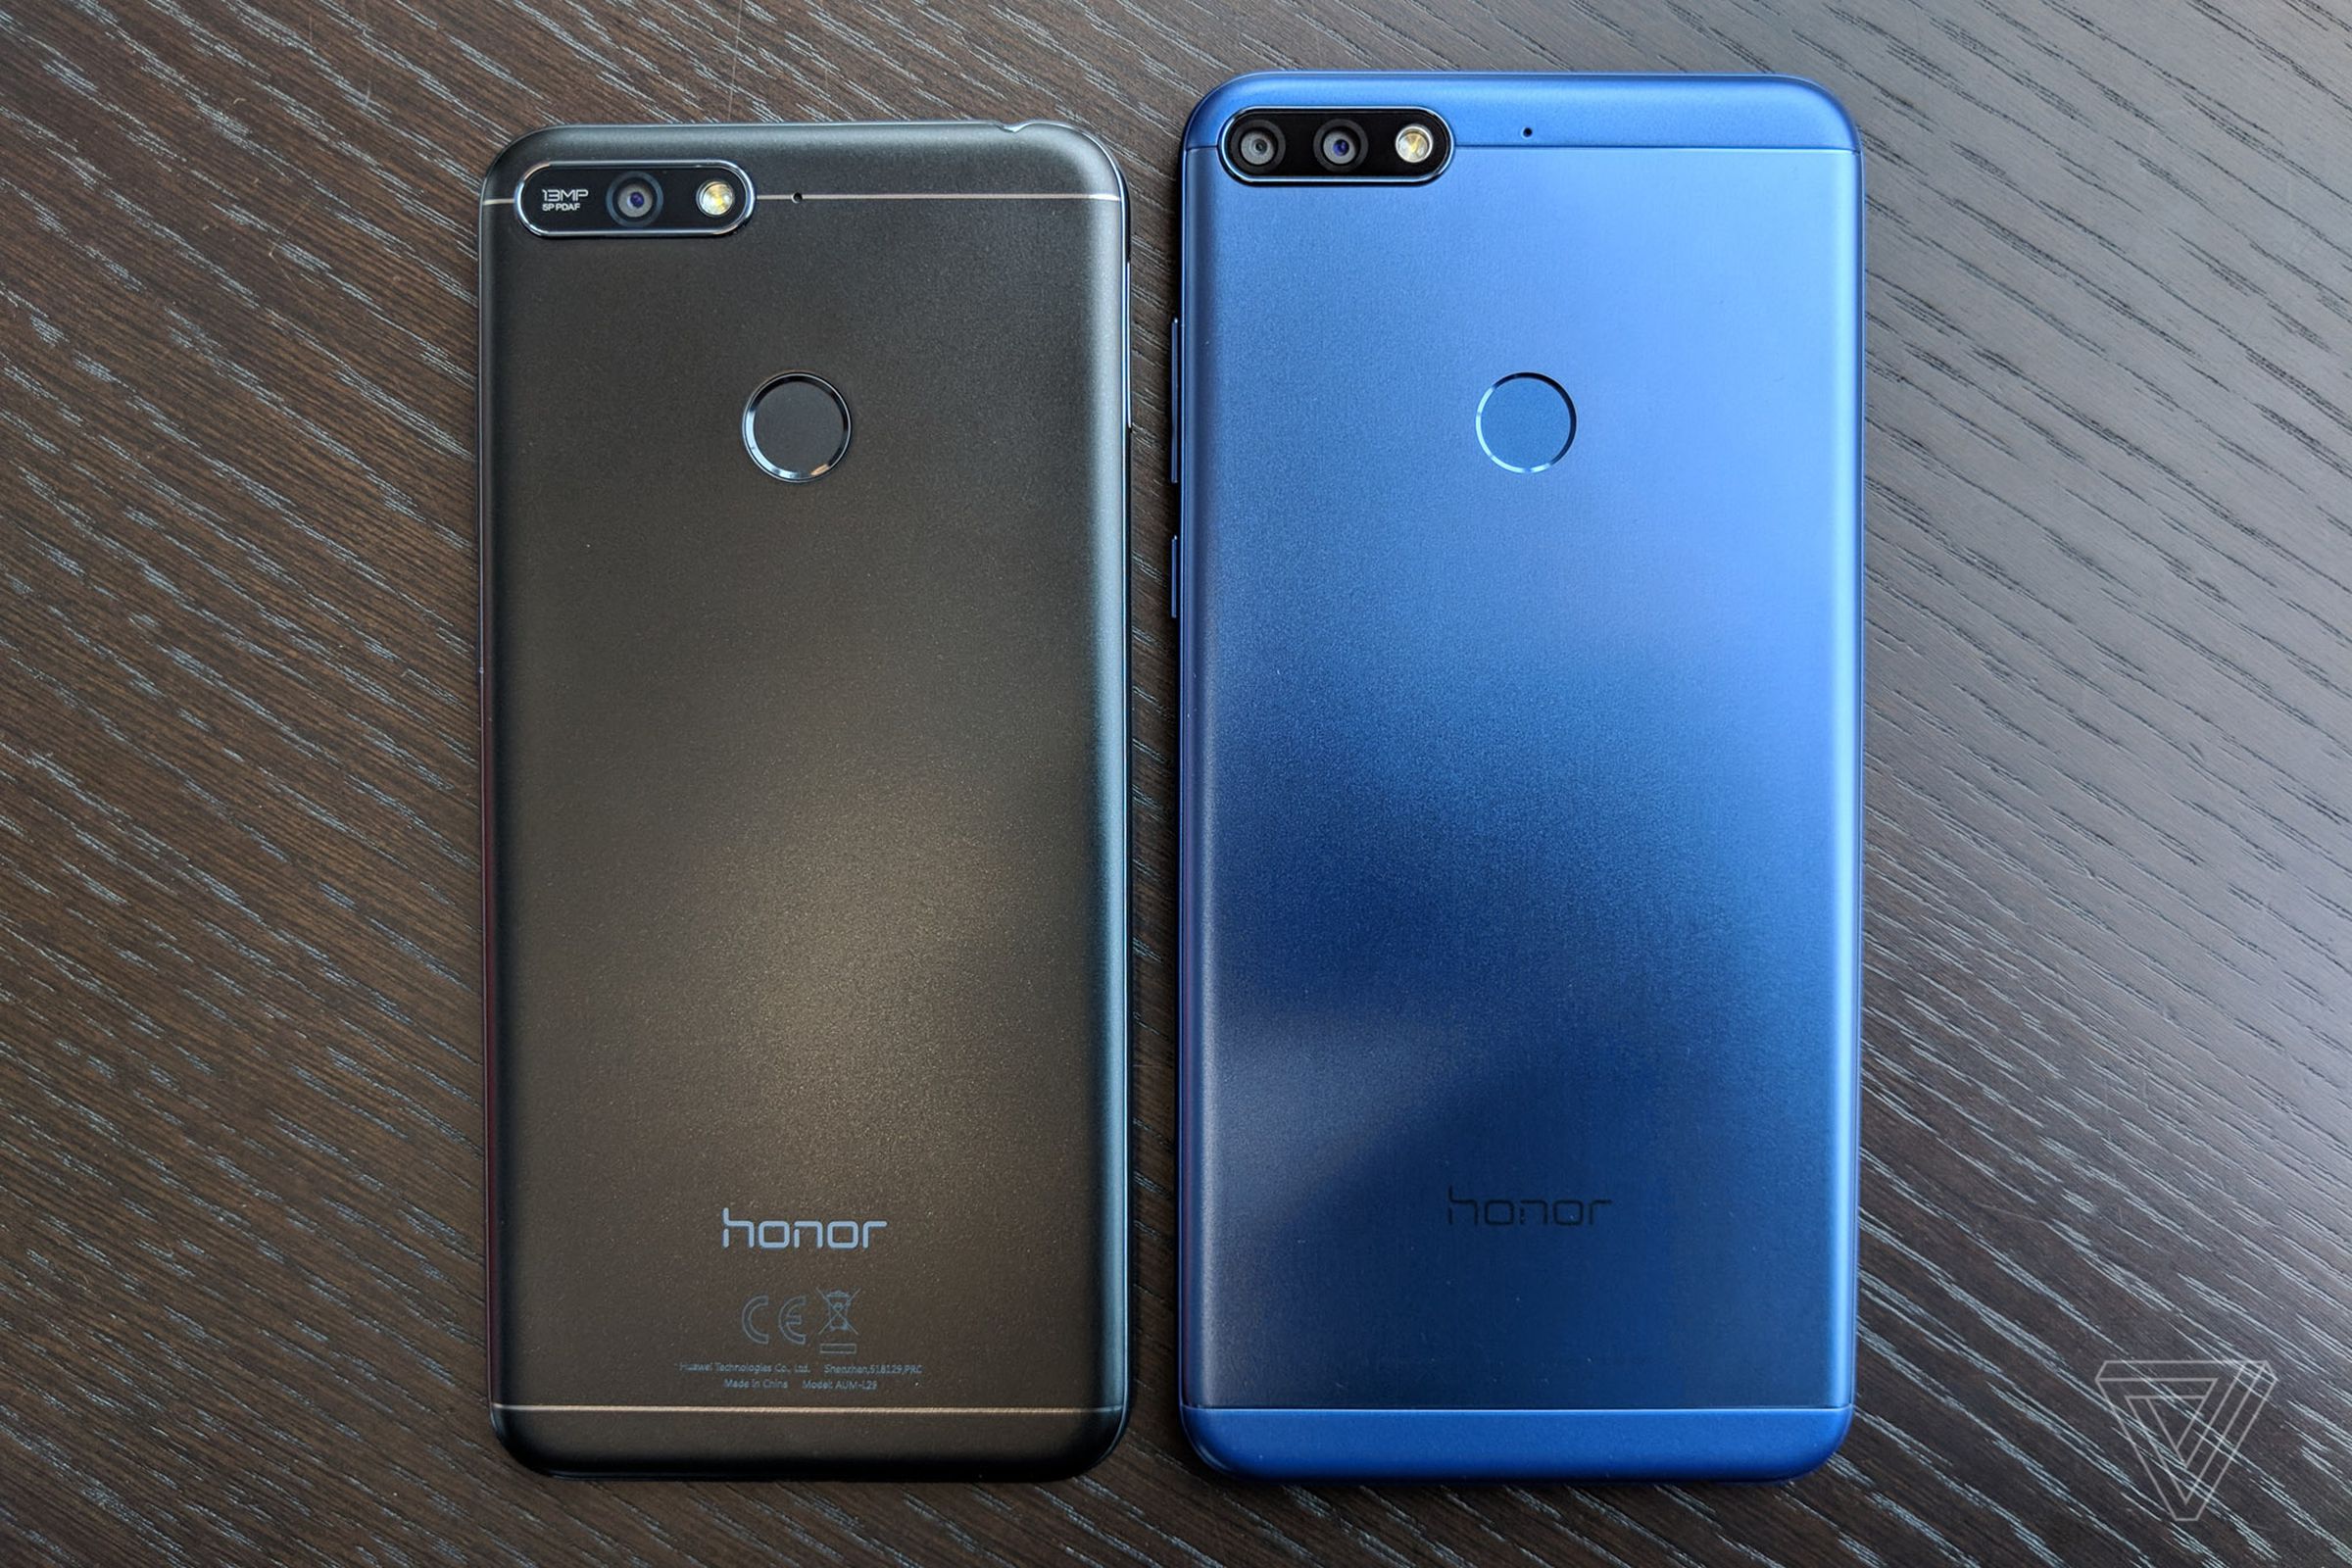 Honor 7A (left) and 7C